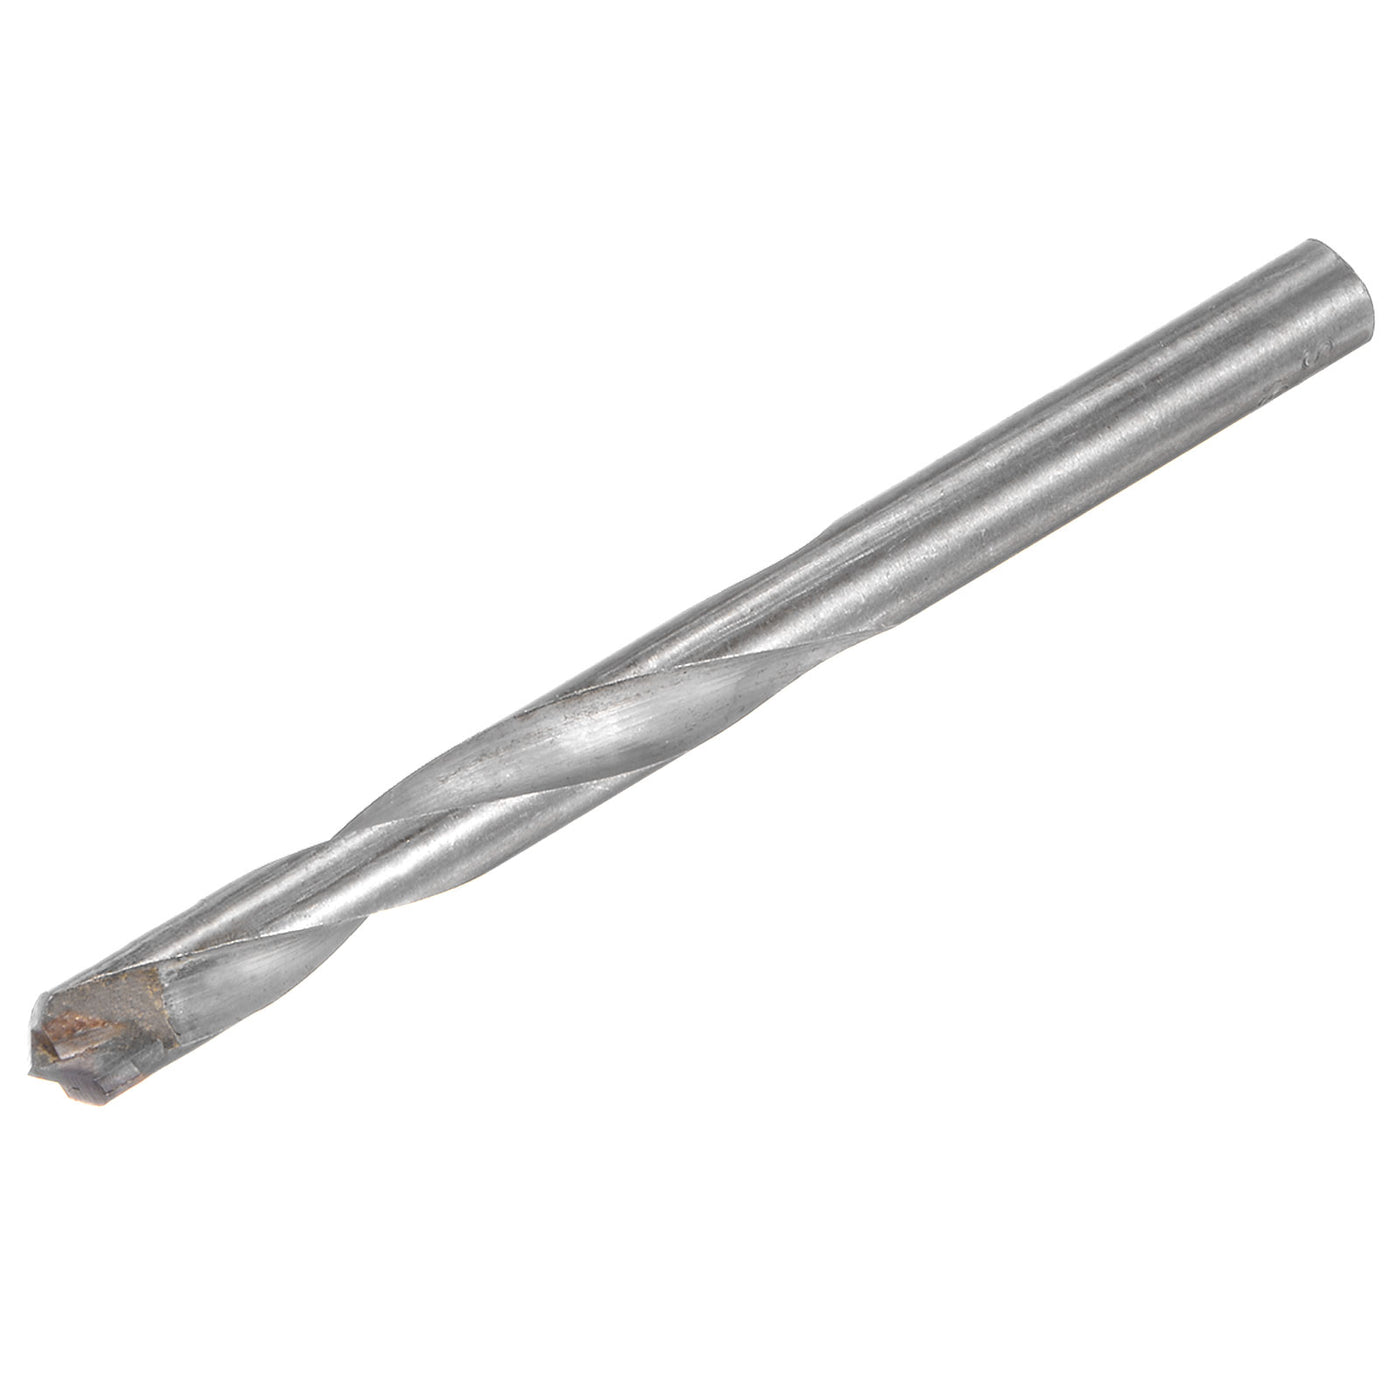 uxcell Uxcell 9mm Cutting Dia Round Shank Cemented Carbide Twist Drill Bit, 110mm Length